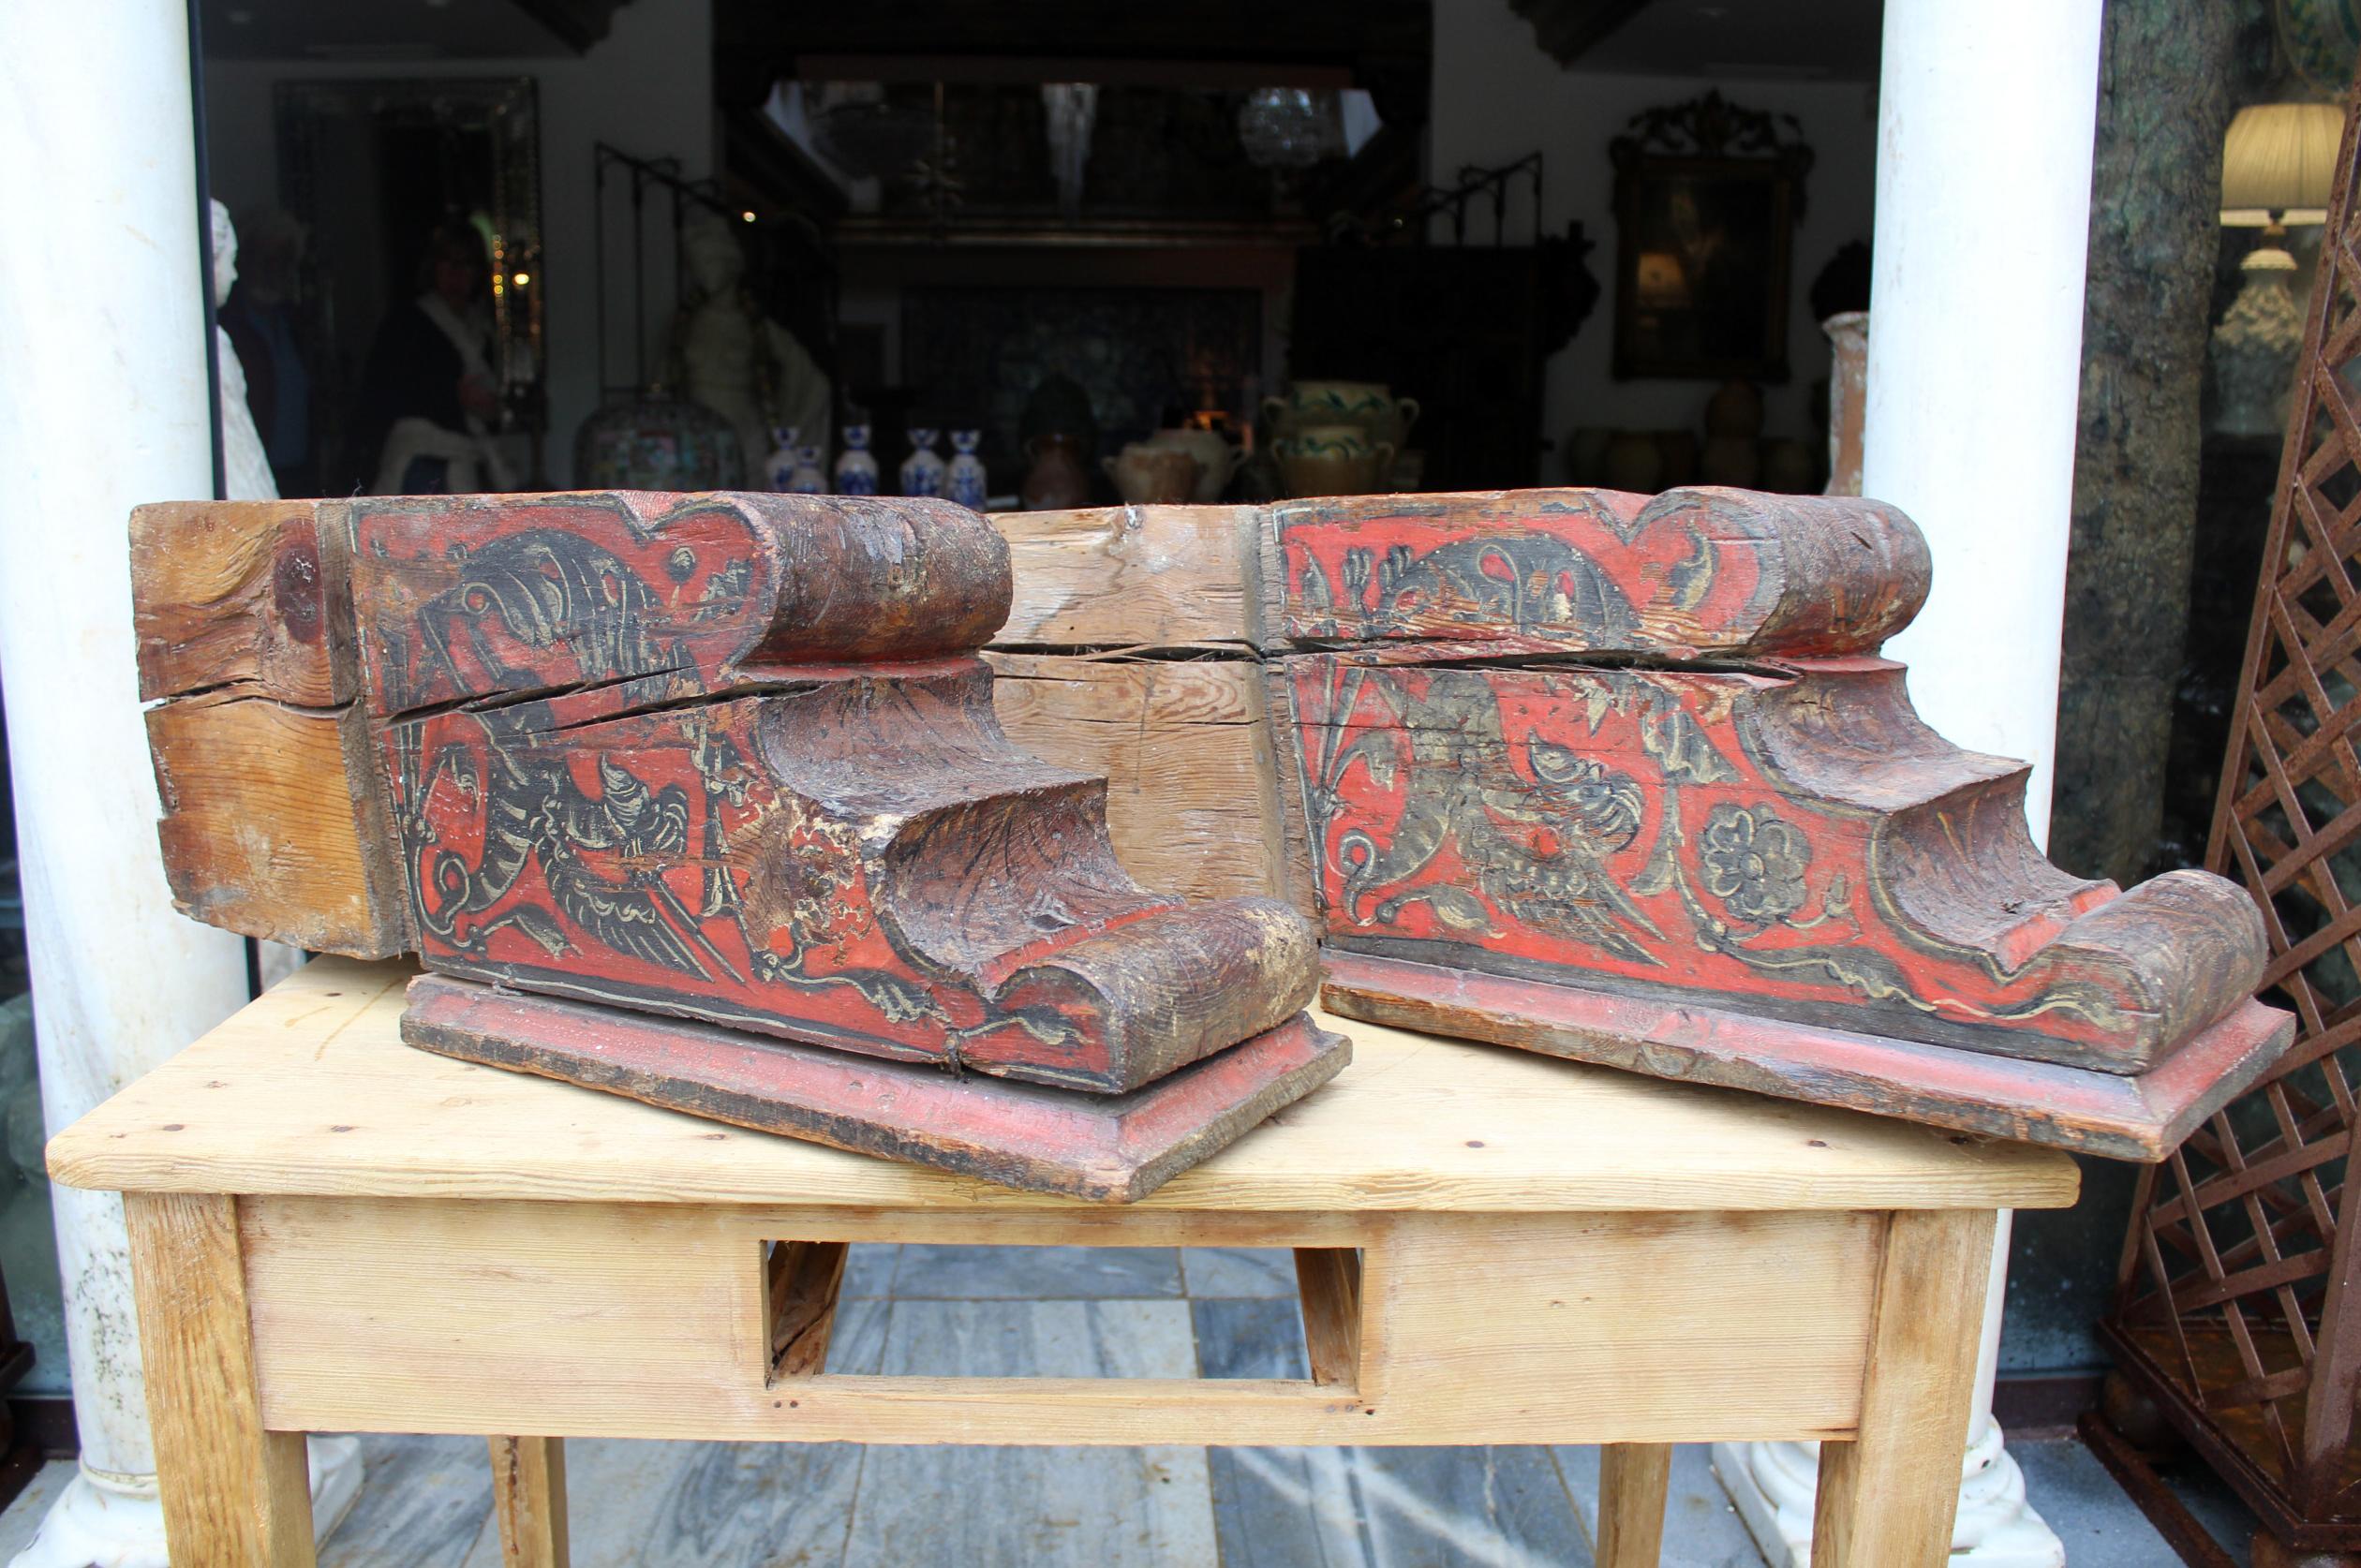 16th Century pair of Spanish wooden footings with medieval scenes of fantastic animals and floral motifs. Polychrome in dark colors on a vivid red background.

Two pieces with great character, ideal for collectors.